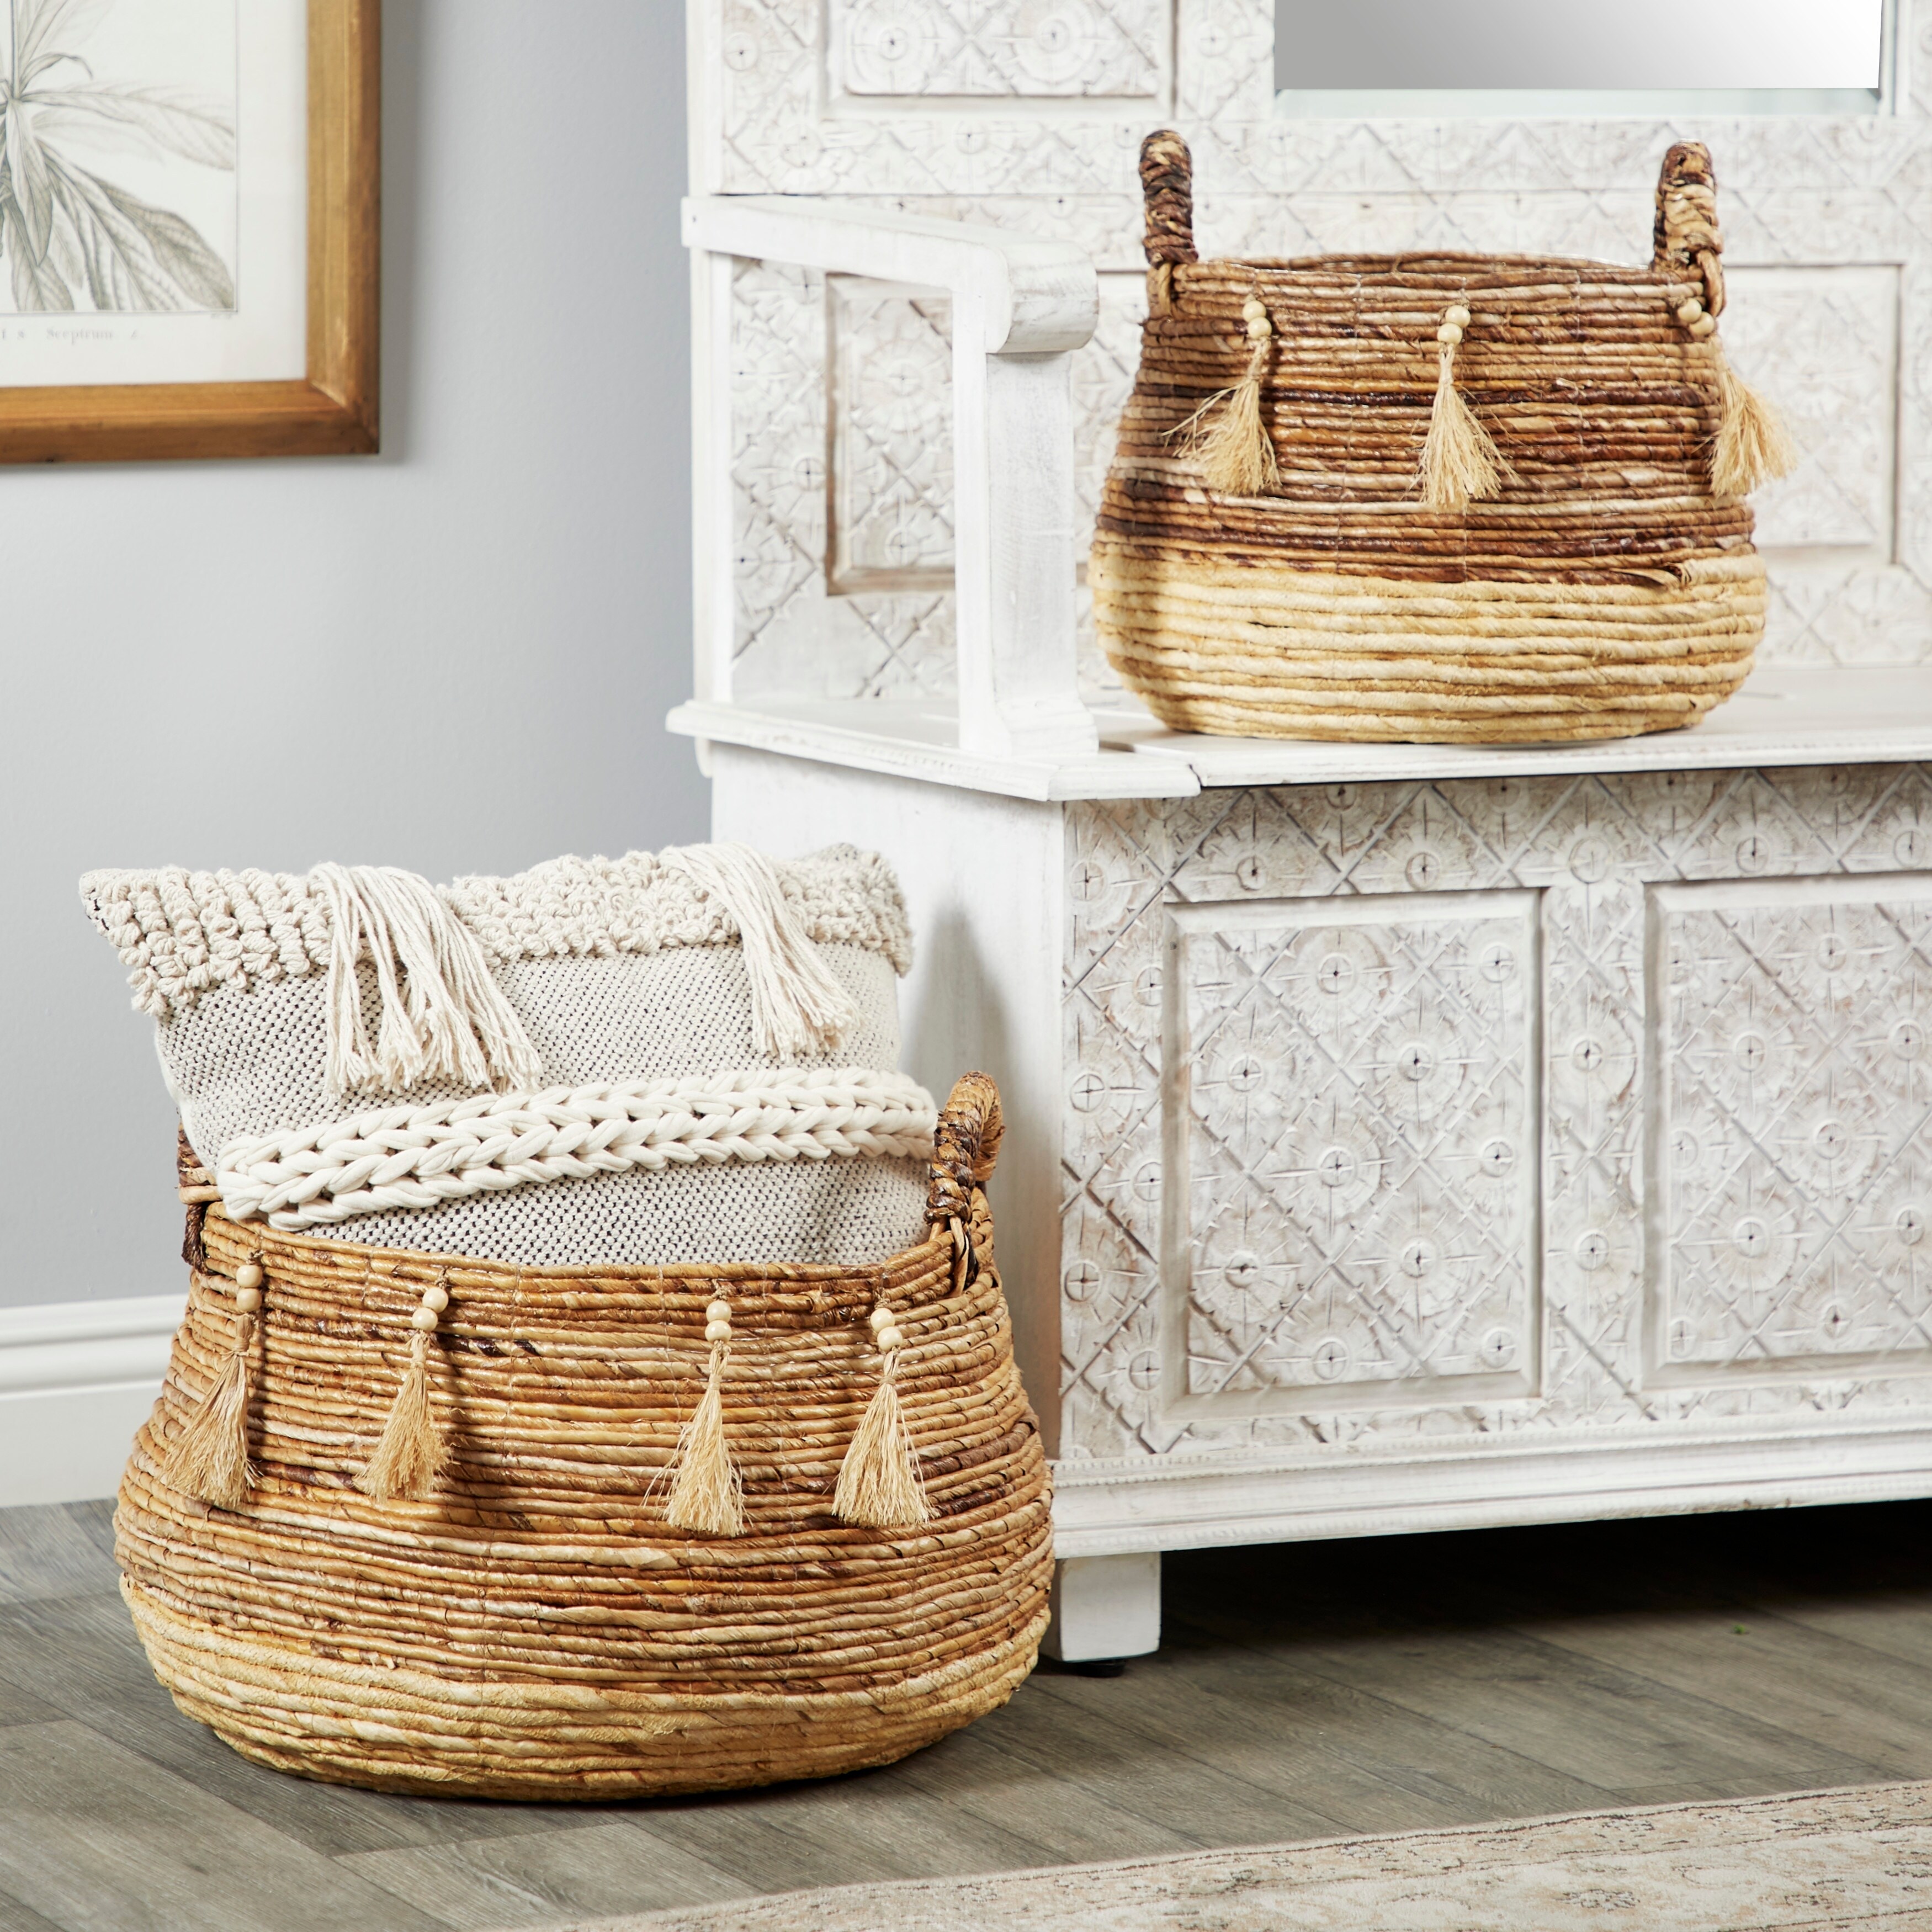 Sunnydaze 8 in Rattan Wicker Basket Planters with Handles/Lining - Set of 5